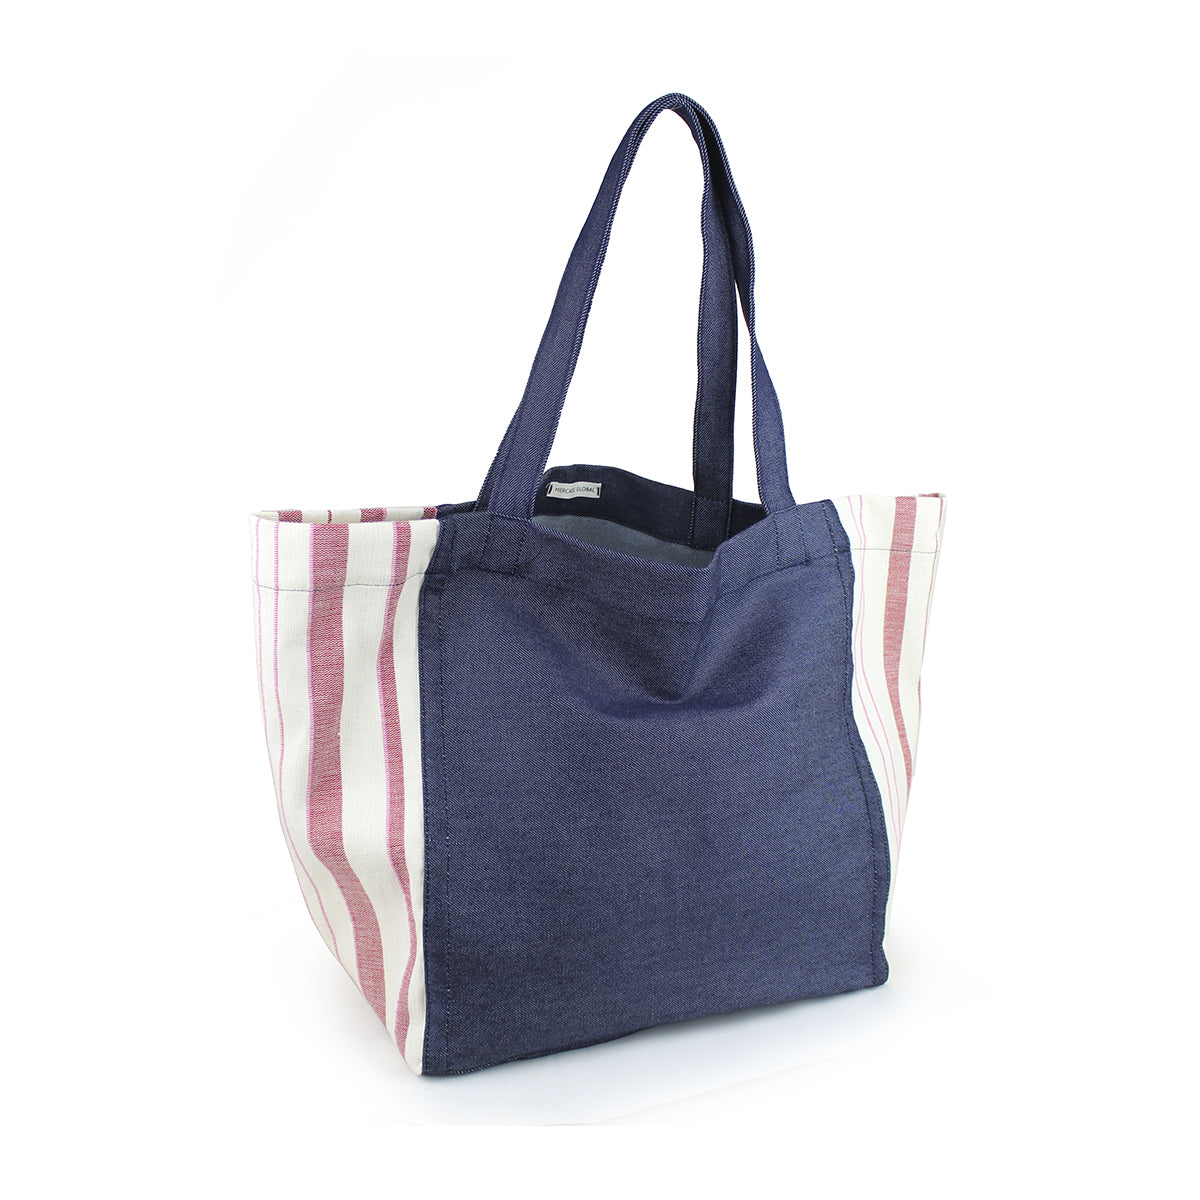 A left-sided angle of the hand woven artisan Blanca Tote in Denim Sunset pattern. The Tote has a dark wash denim center and handles. The sides have a triangle finish in a light red and white vertical striped fabric.